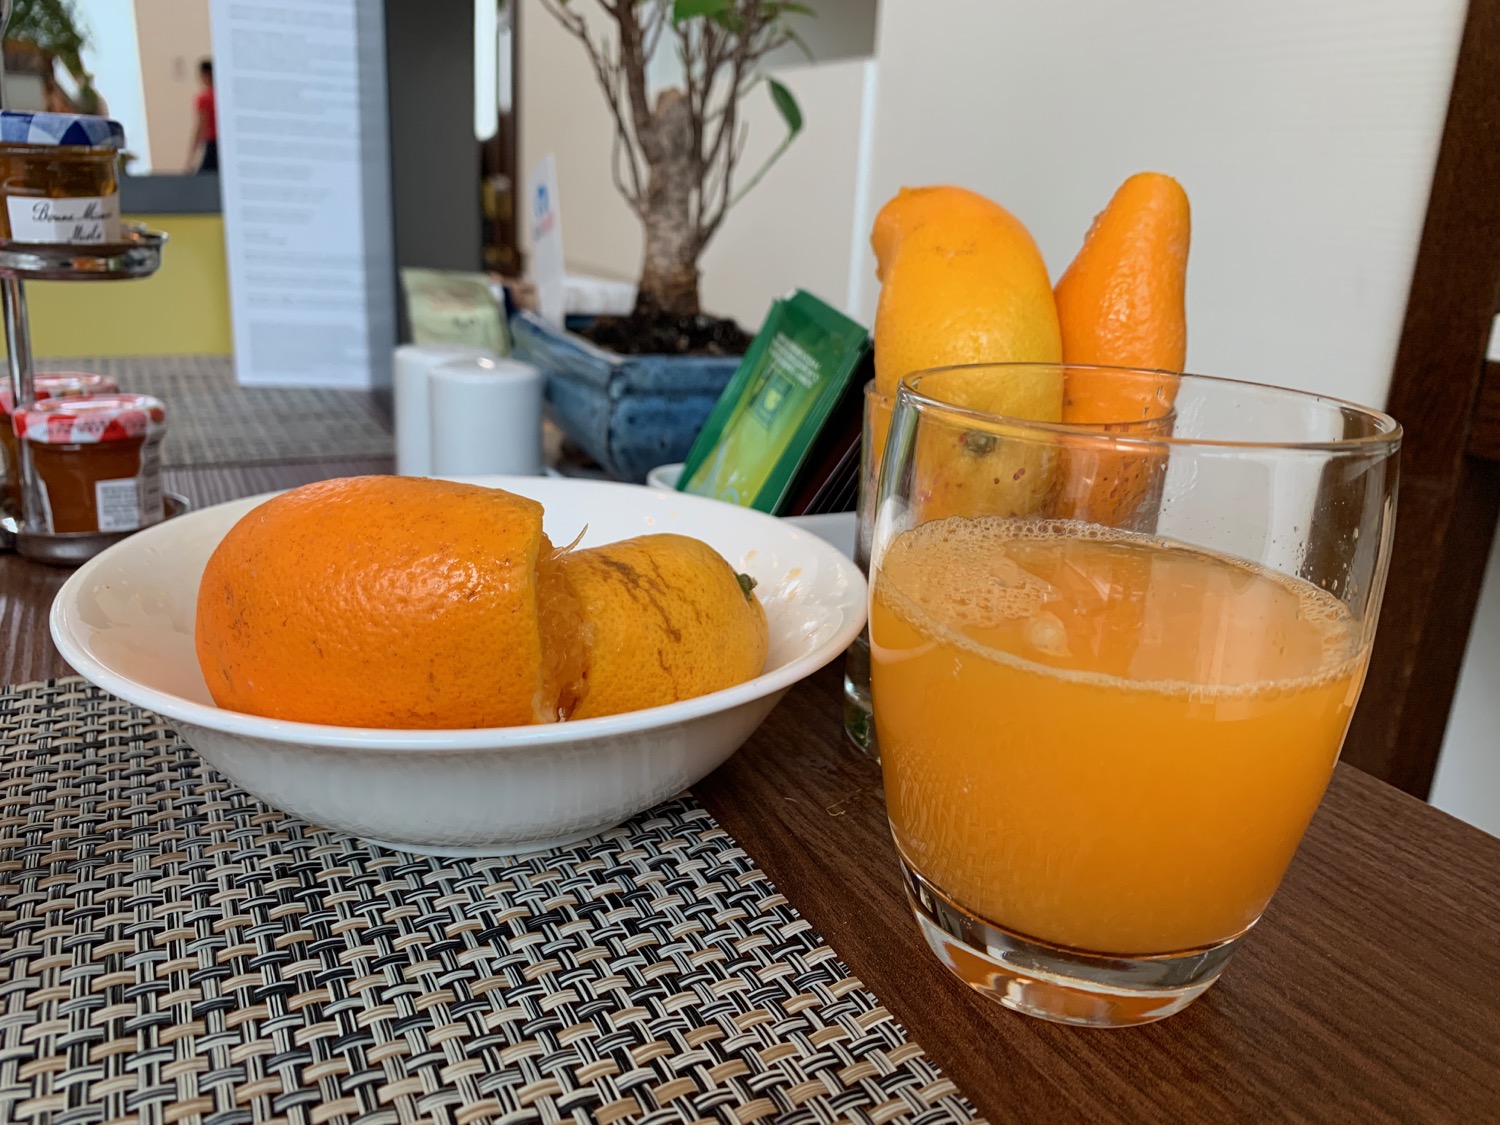 a bowl of oranges and a glass of orange juice